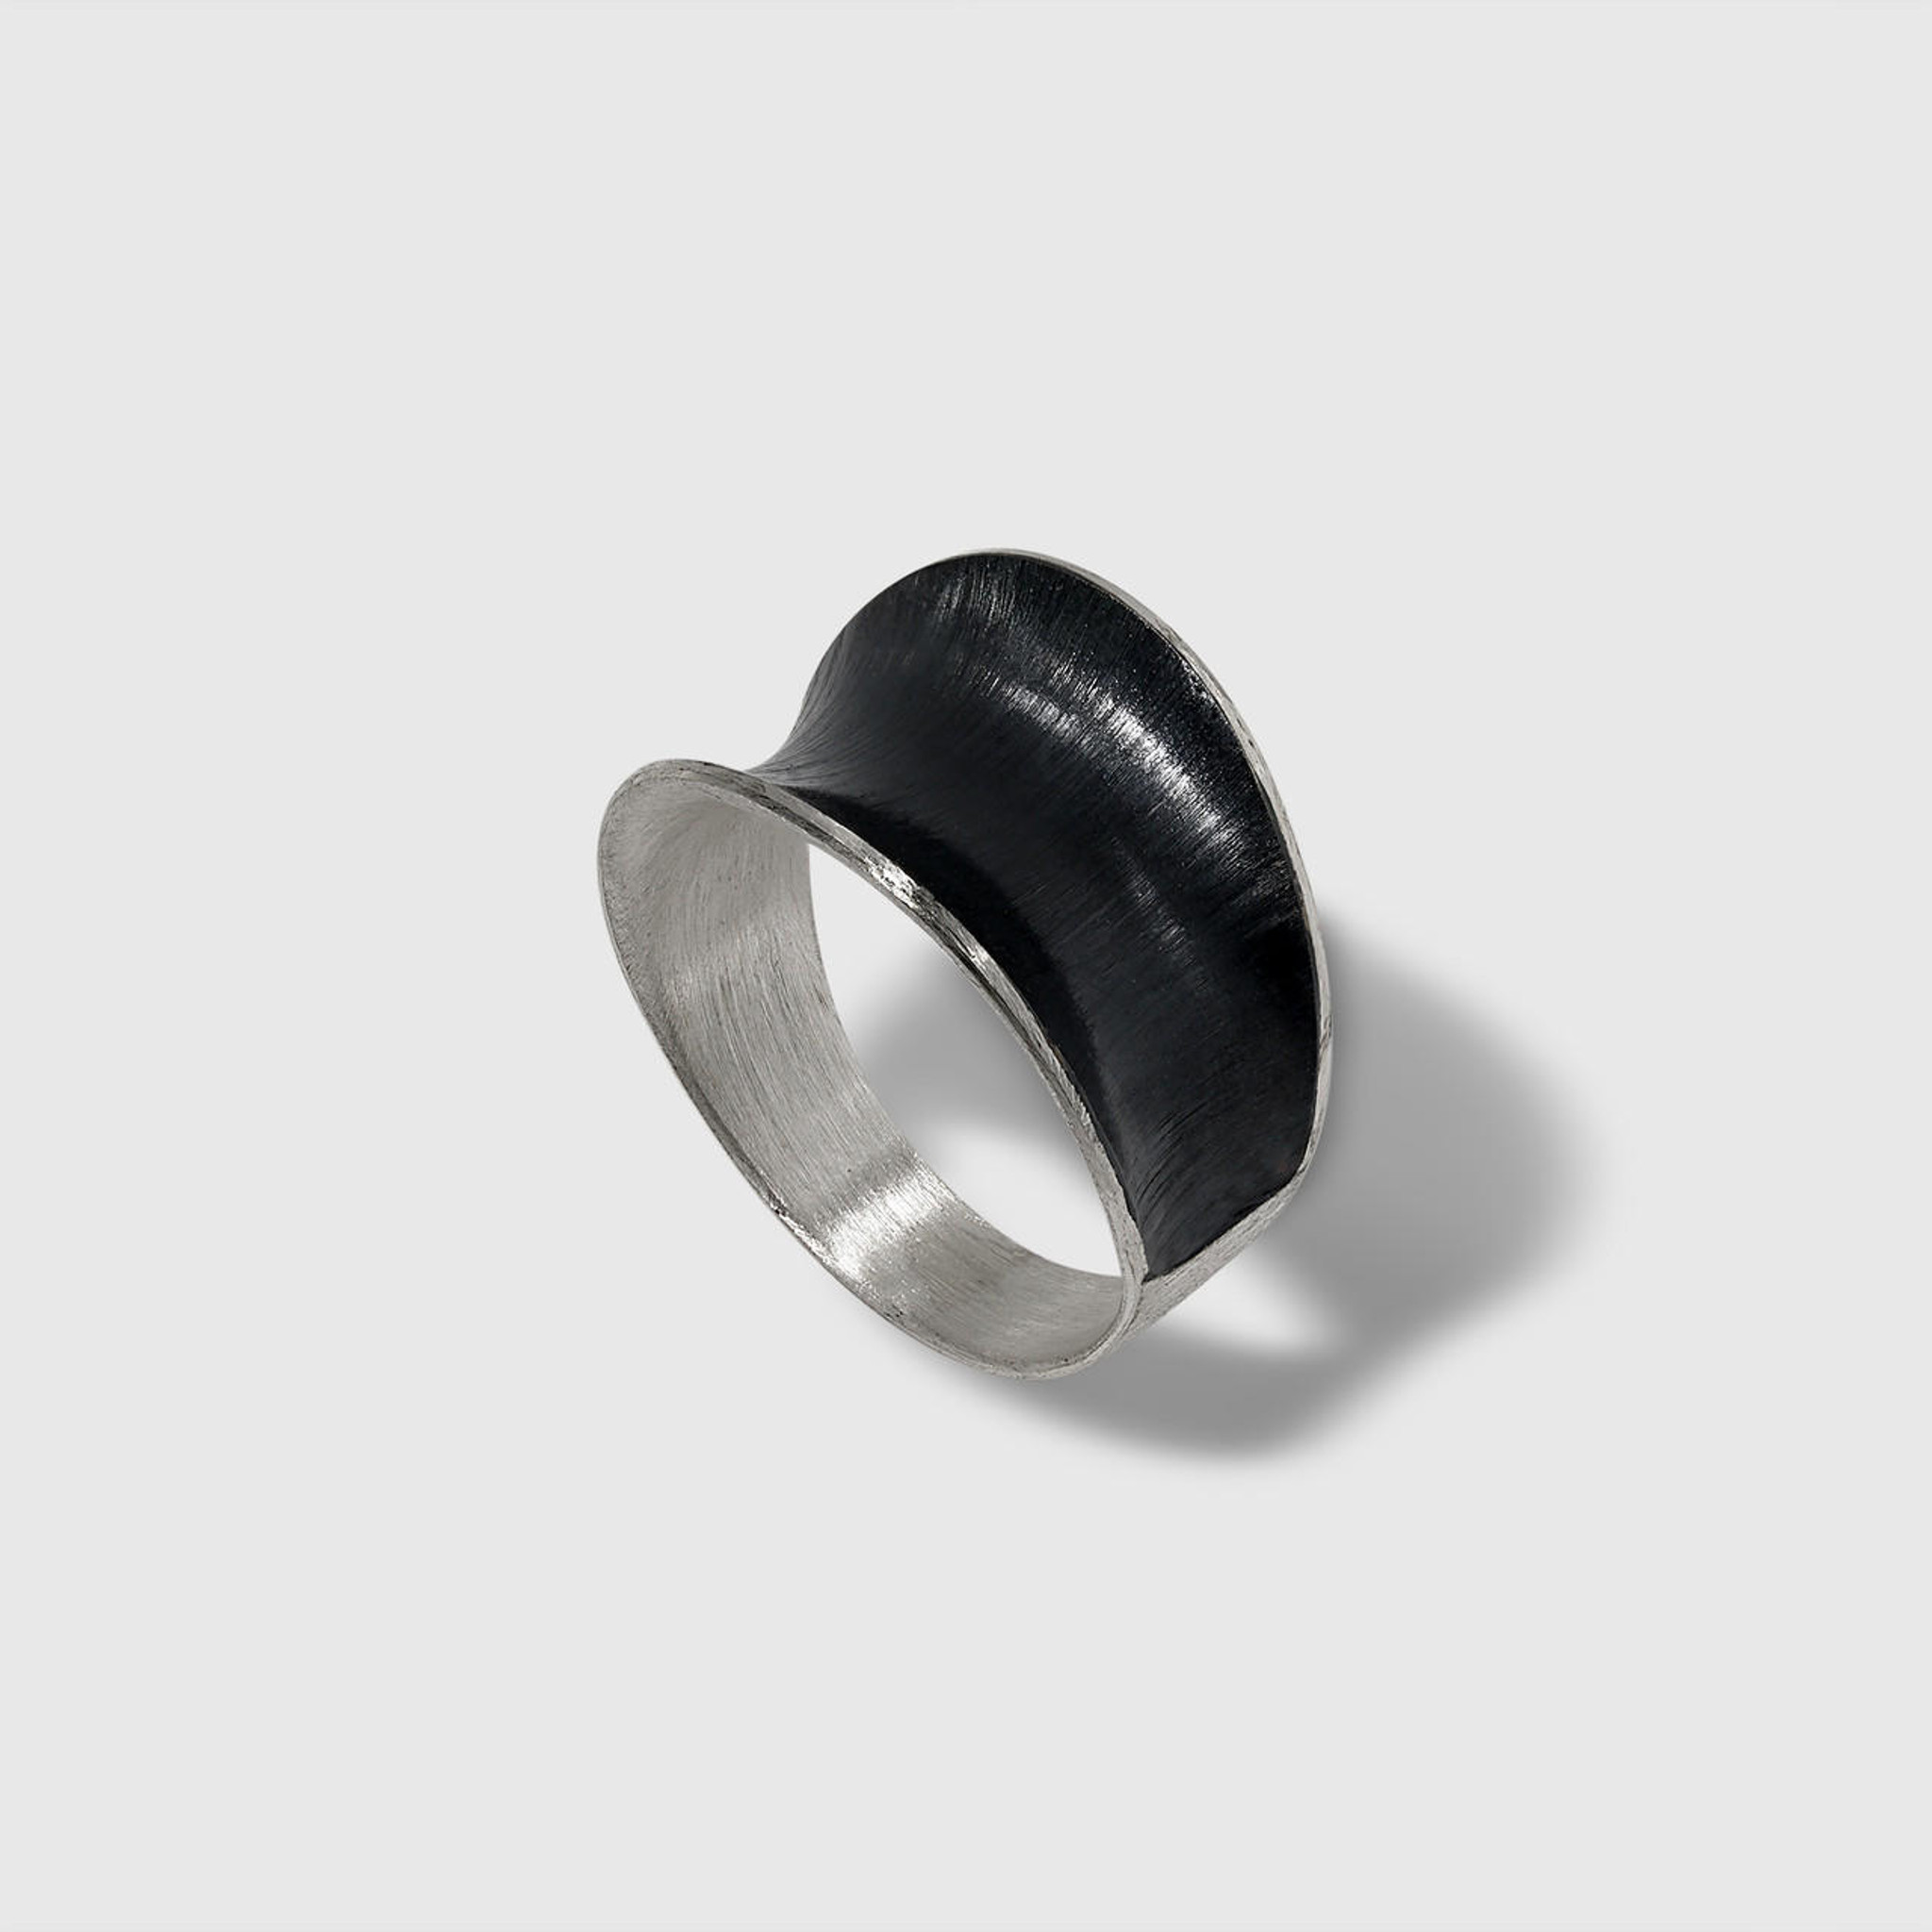 Mysterium Collection Oxidized Sterling Silver, Matte Finish Concave Ring, handmade in Poland, sterling silver, stainless steel, diamond detail  | elk & HAMMER